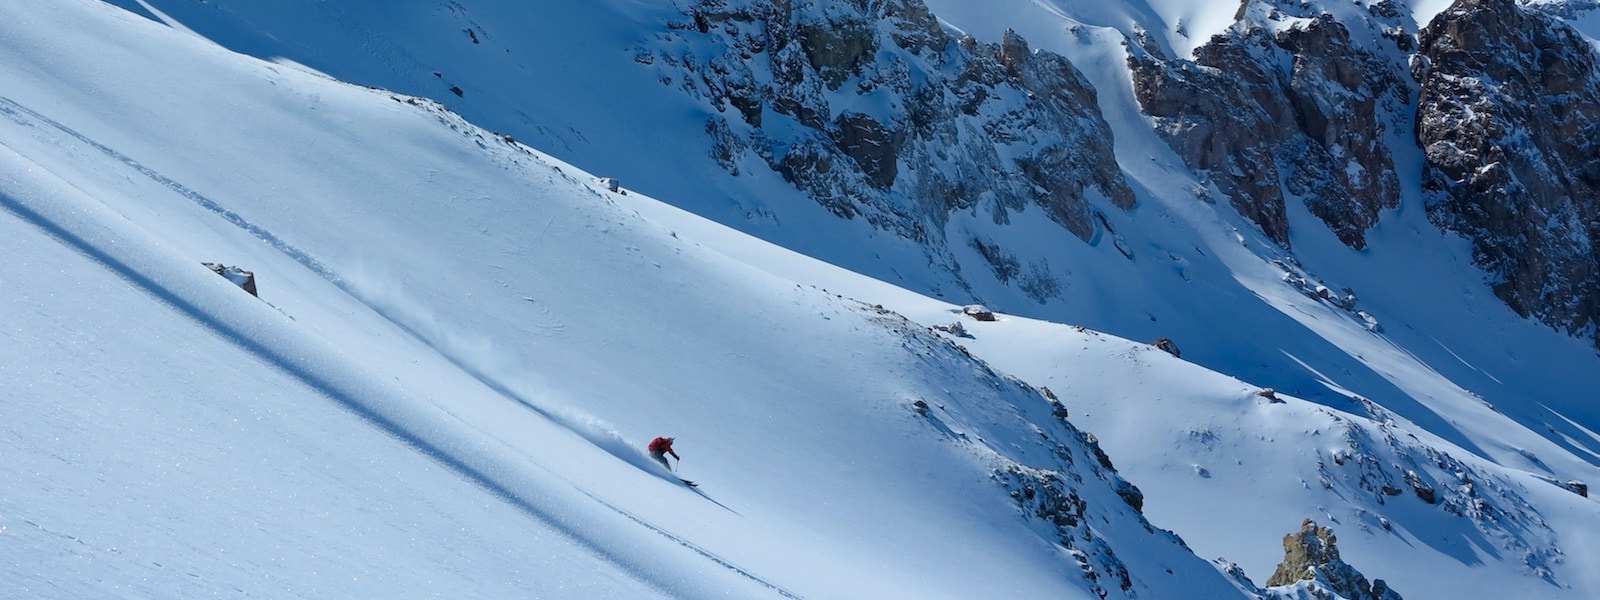 Skiing the Andes Lift Assisted Backcountry Skiing in Las Lenas